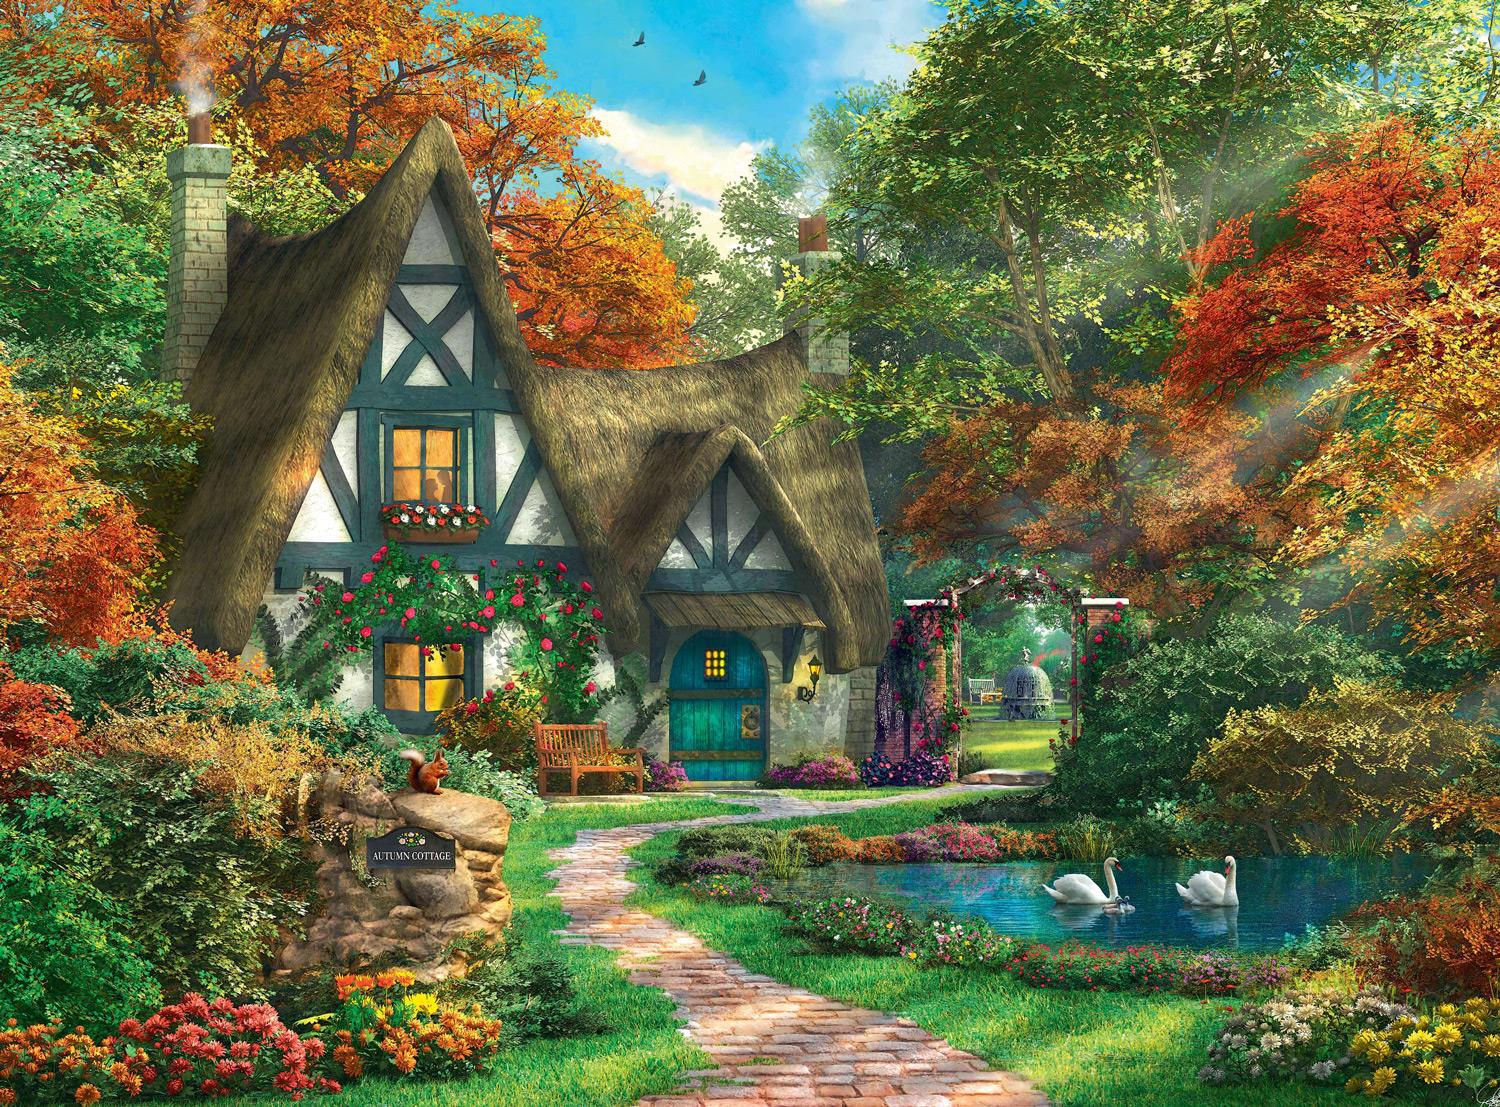 Ravensburger Cottage in Autumn Jigsaw Puzzle (500 Pieces)